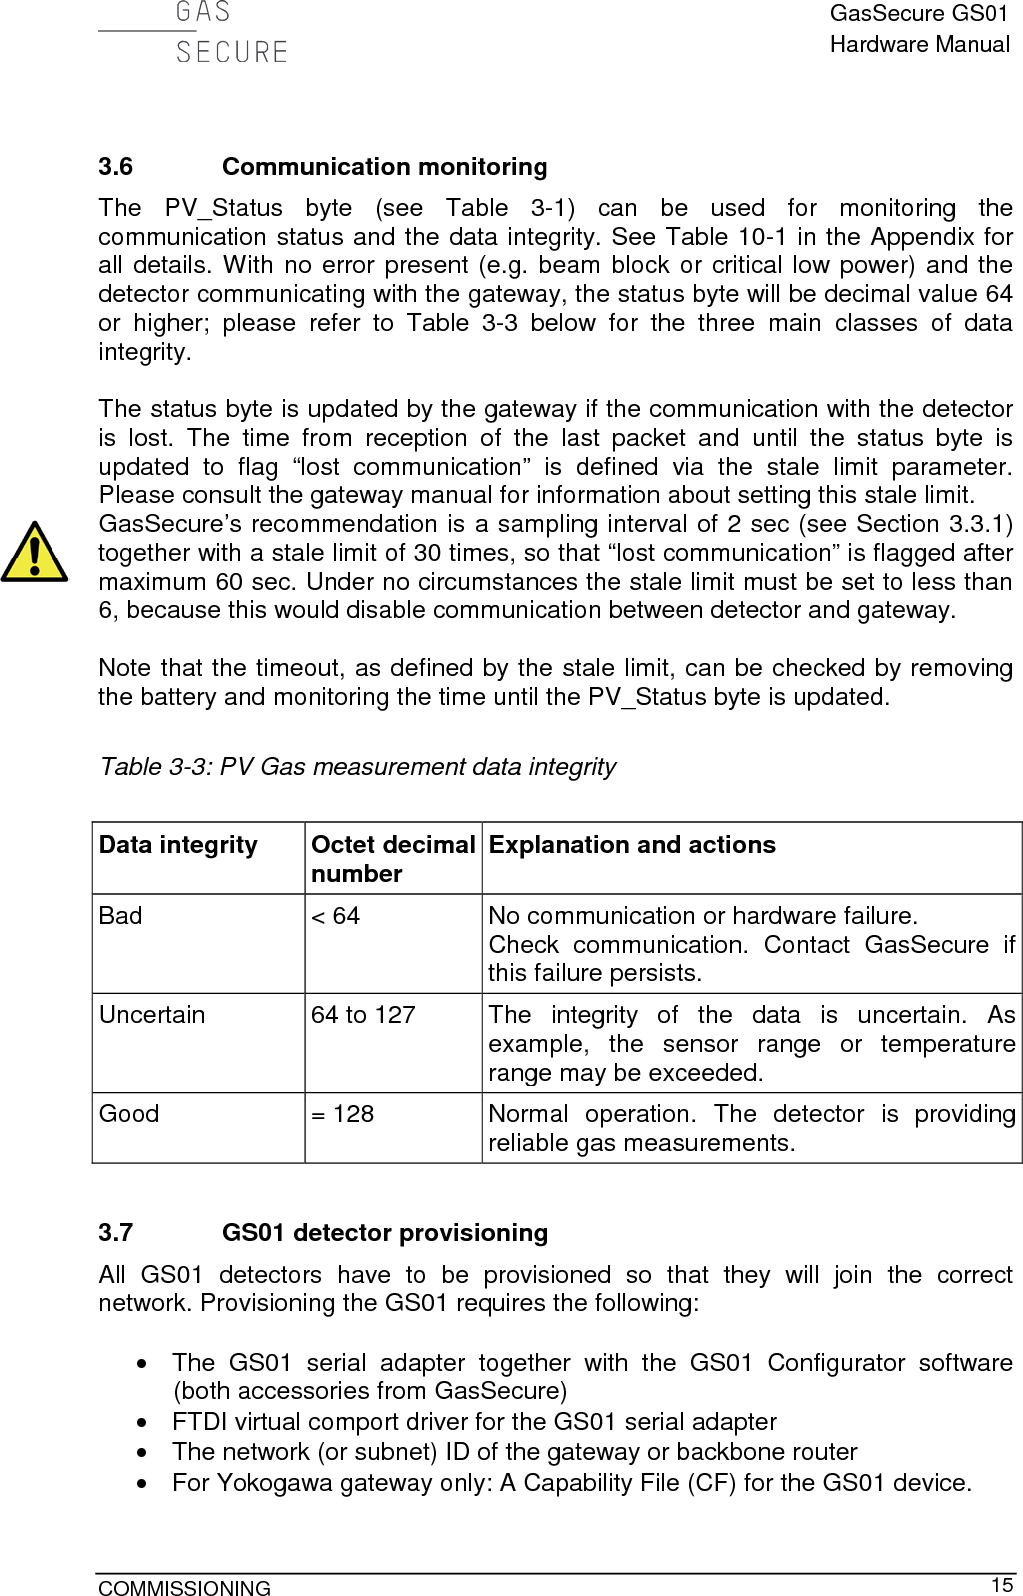  GasSecure GS01 Hardware Manual  COMMISSIONING     15  3.6 Communication monitoring The  PV_Status  byte (see Table  3-1) can be used for monitoring the communication status and the data integrity. See Table 10-1 in the Appendix for all details. With no error present (e.g. beam block or critical low power) and the detector communicating with the gateway, the status byte will be decimal value 64 or higher; please refer to Table  3-3  below for the three main classes of data integrity.  The status byte is updated by the gateway if the communication with the detector is lost. The time from reception of the last packet and until the status byte is updated to flag “lost communication” is defined via the stale limit parameter. Please consult the gateway manual for information about setting this stale limit.  GasSecure’s recommendation is a sampling interval of 2 sec (see Section 3.3.1) together with a stale limit of 30 times, so that “lost communication” is flagged after maximum 60 sec. Under no circumstances the stale limit must be set to less than 6, because this would disable communication between detector and gateway.  Note that the timeout, as defined by the stale limit, can be checked by removing the battery and monitoring the time until the PV_Status byte is updated.   Table 3-3: PV Gas measurement data integrity  Data integrity Octet decimal number Explanation and actions Bad &lt; 64 No communication or hardware failure. Check communication. Contact GasSecure if this failure persists. Uncertain 64 to 127 The integrity of the data is uncertain. As example, the sensor range or temperature range may be exceeded. Good = 128 Normal operation. The detector is providing reliable gas measurements.  3.7 GS01 detector provisioning All GS01 detectors have to be provisioned so that they will join the correct network. Provisioning the GS01 requires the following:  • The GS01 serial adapter together with the GS01 Configurator software (both accessories from GasSecure) • FTDI virtual comport driver for the GS01 serial adapter  • The network (or subnet) ID of the gateway or backbone router • For Yokogawa gateway only: A Capability File (CF) for the GS01 device. 